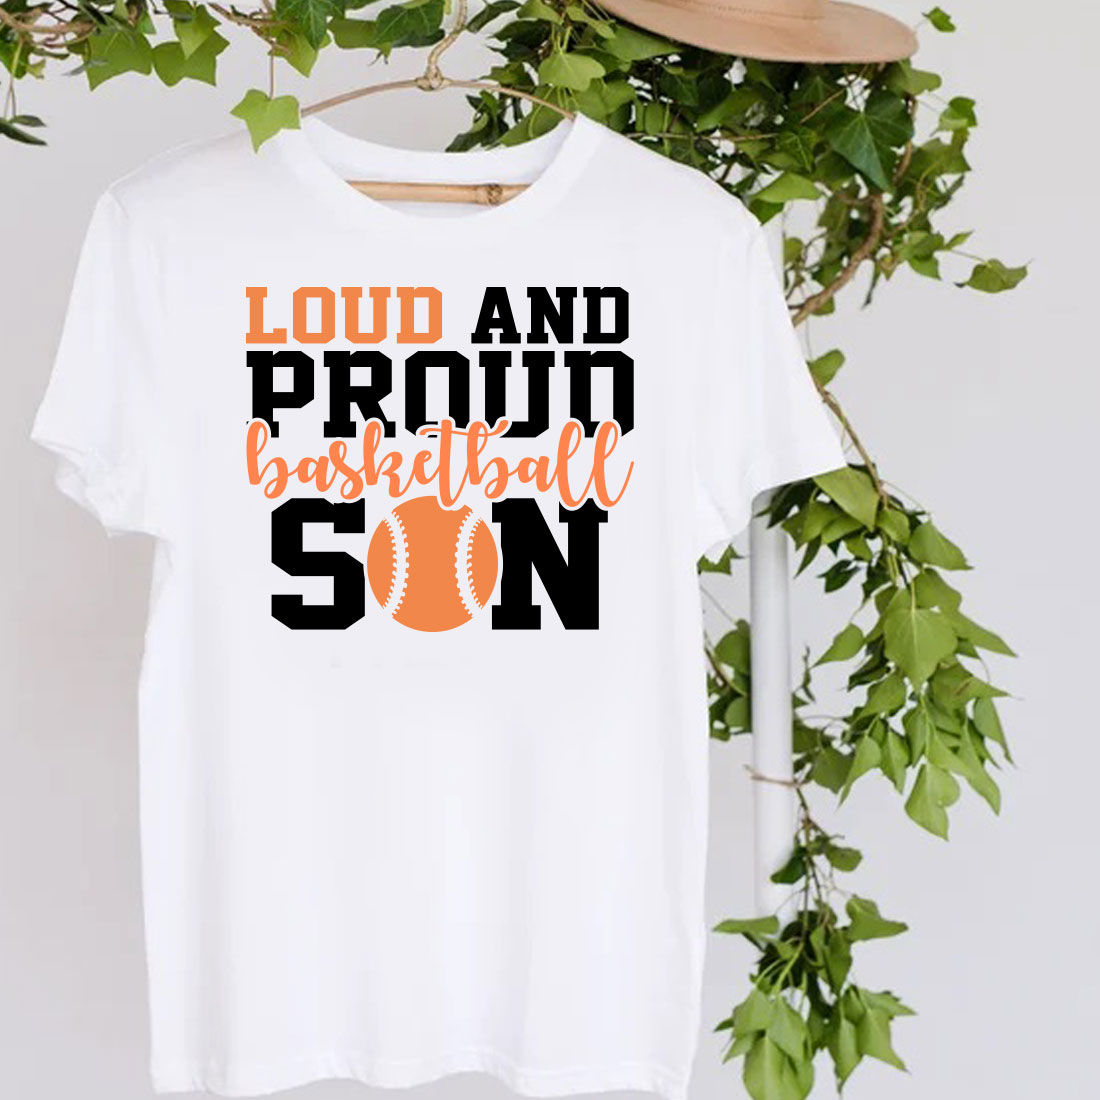 T - shirt that says loud and proud baseball son.